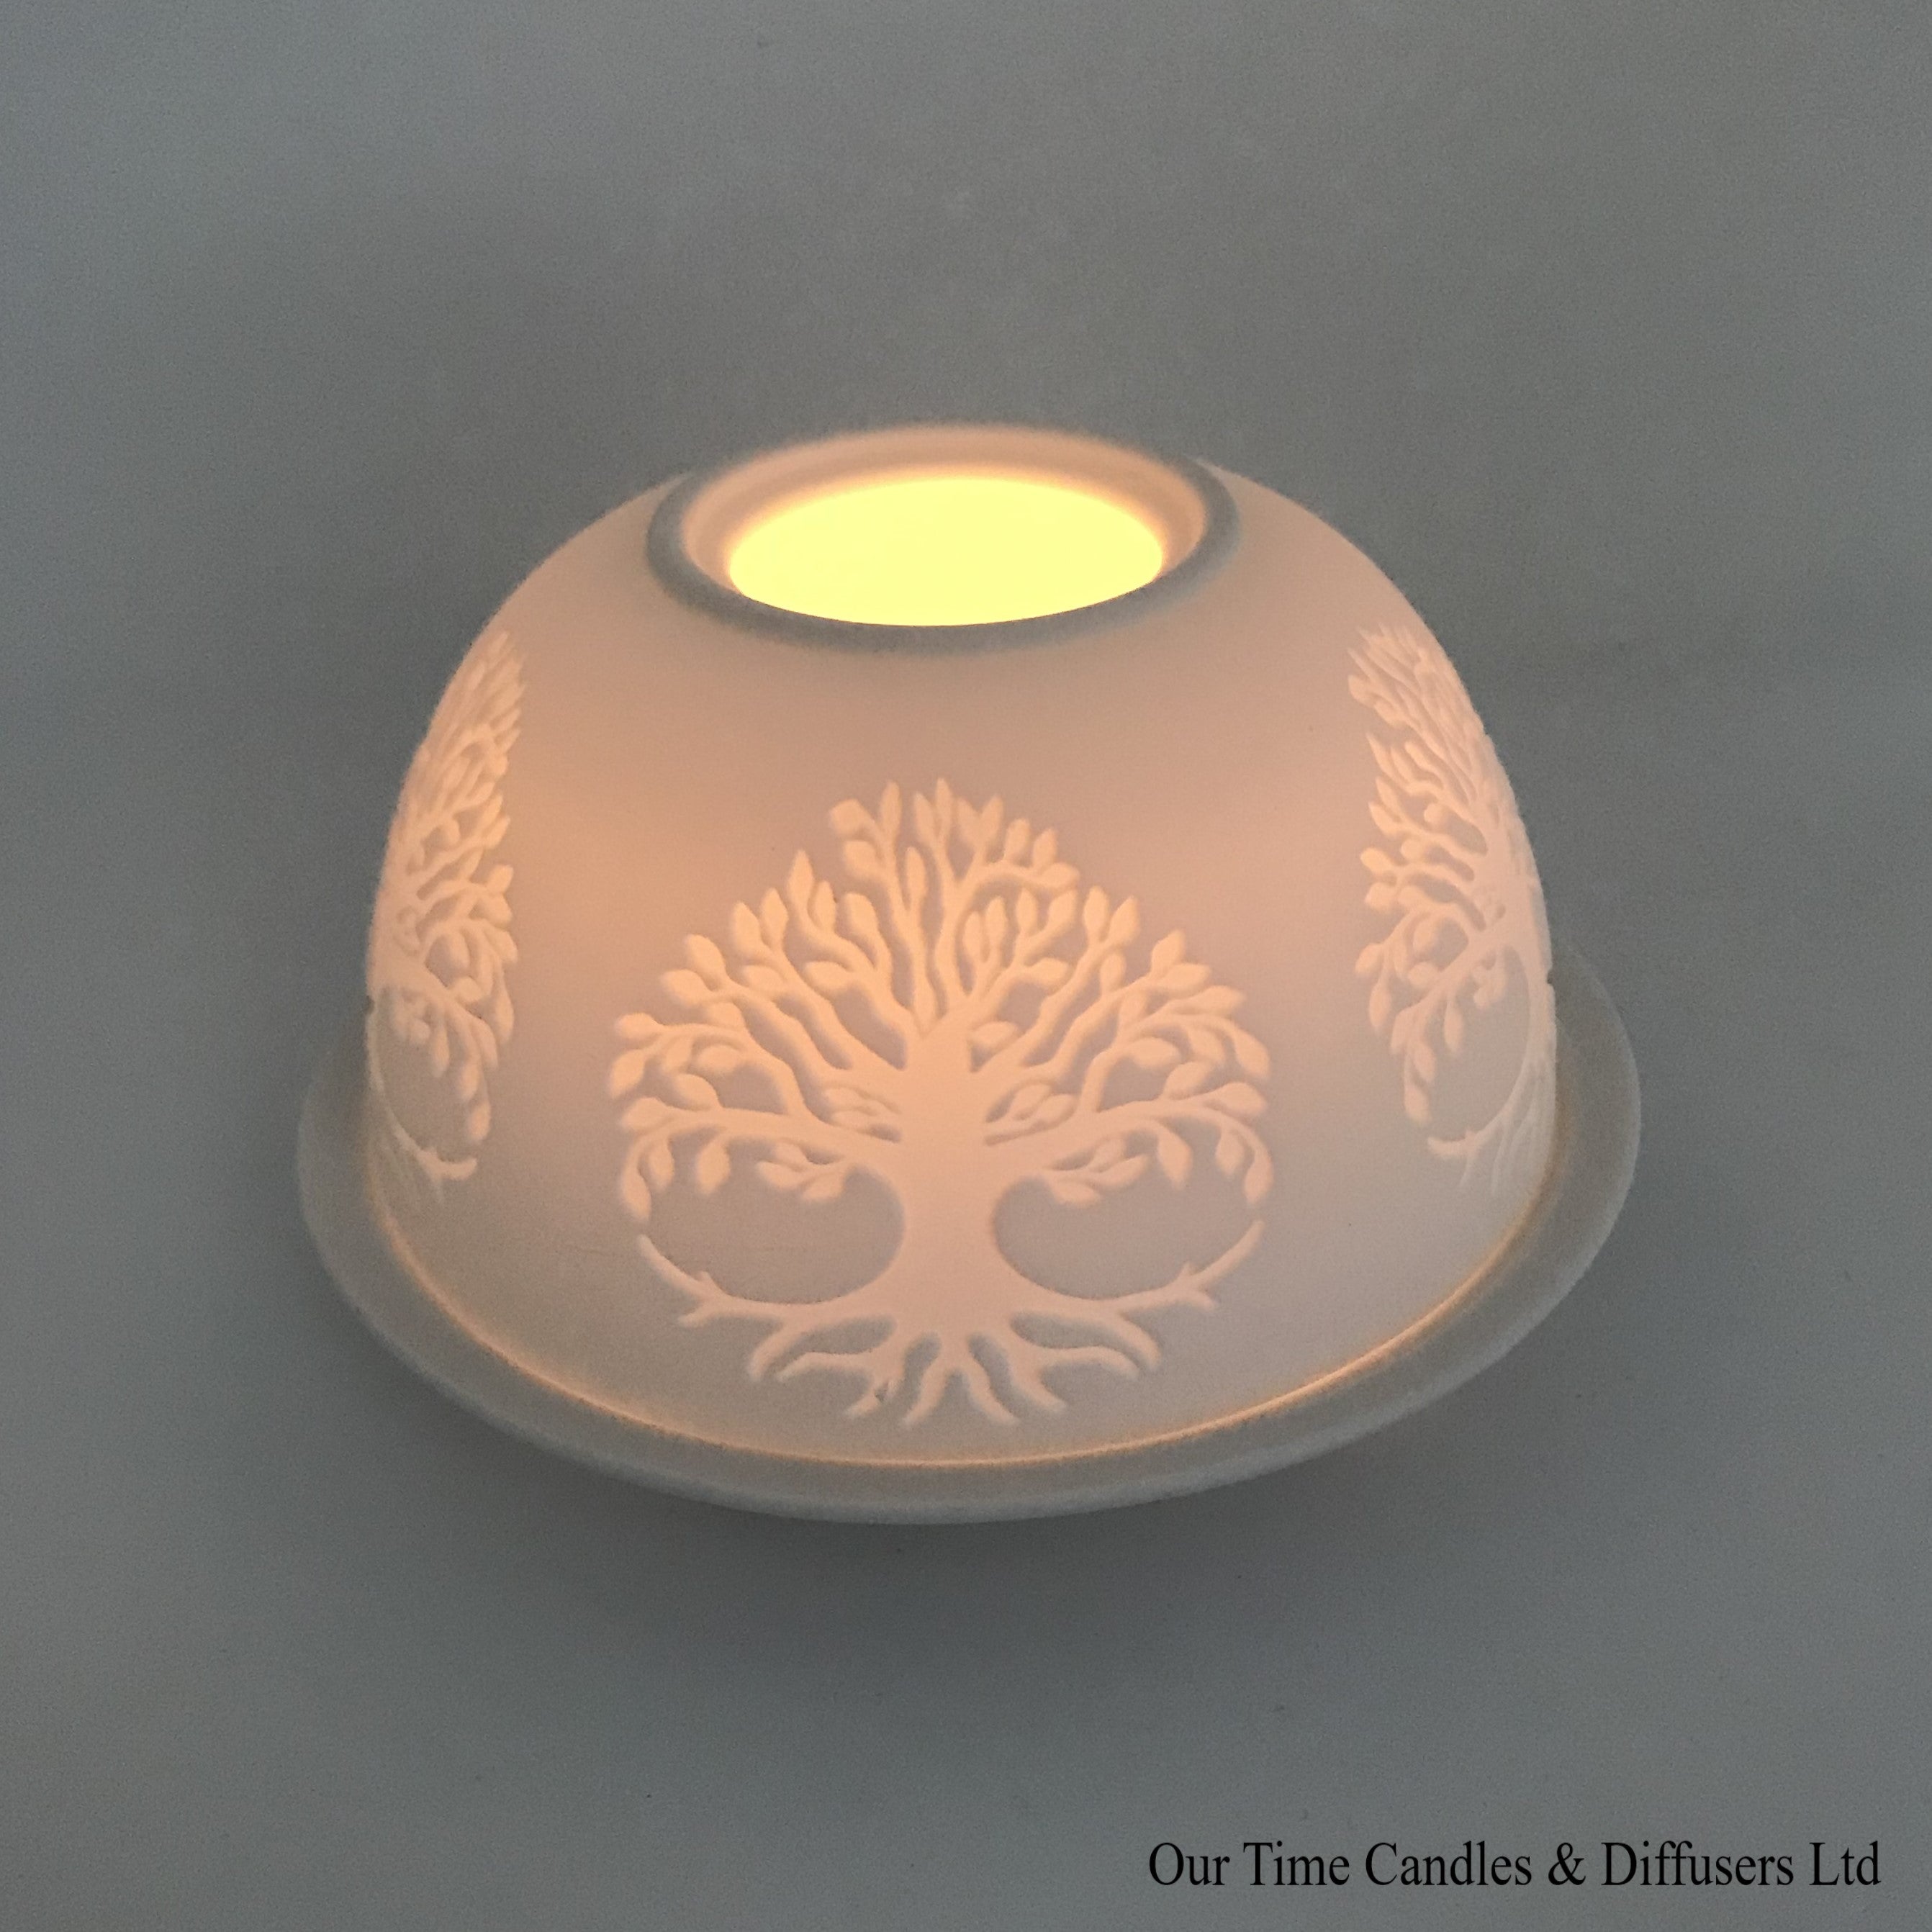 Tealight Holders from Our Time Candles & Diffusers.